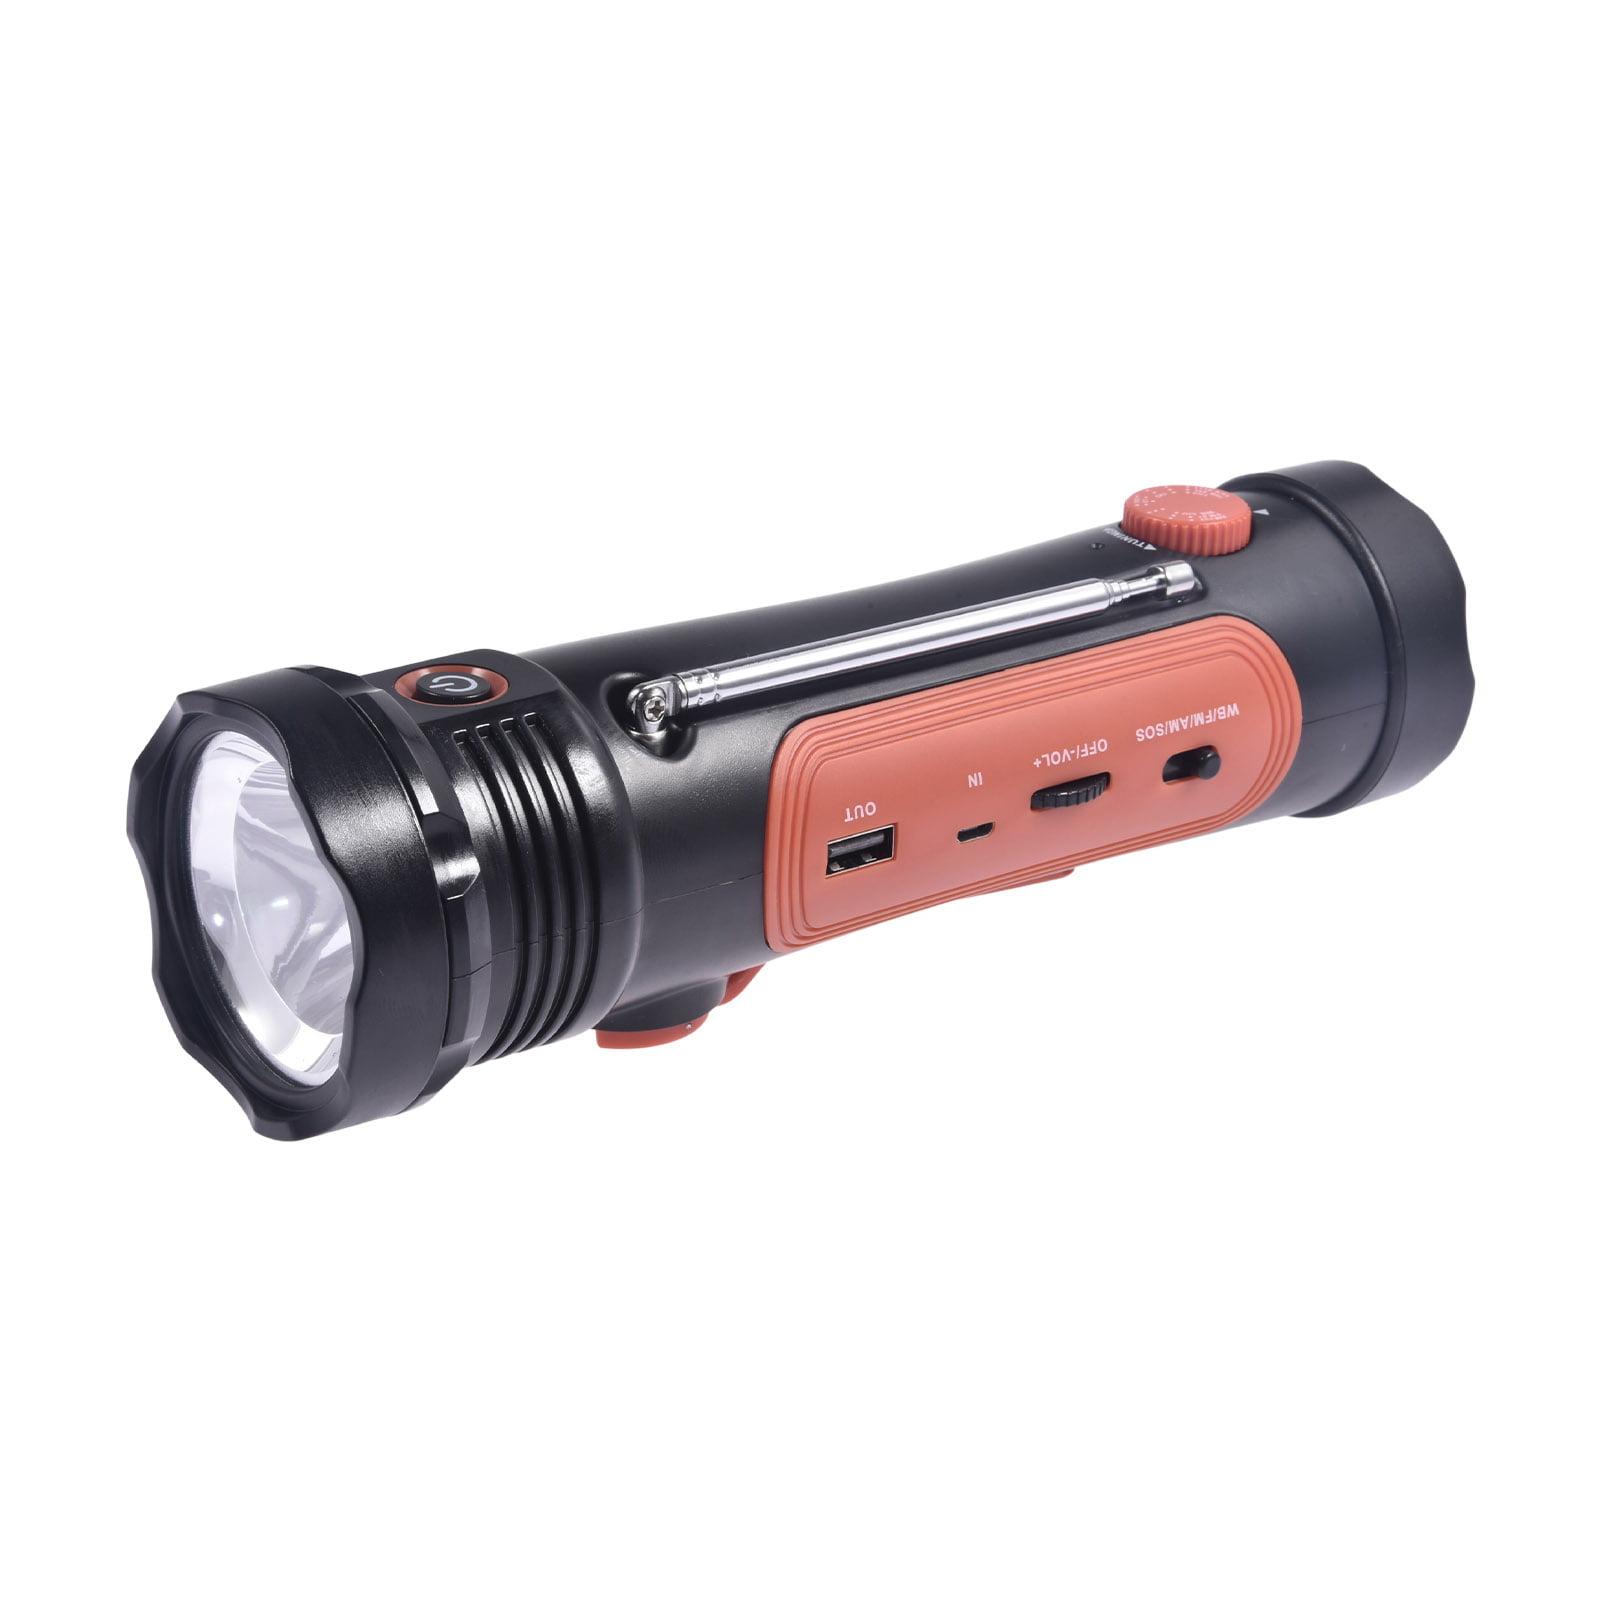 Small Bright 9 Bulb LED FLASHLIGHT Emergency Weather Survival Torch Lamp Light 